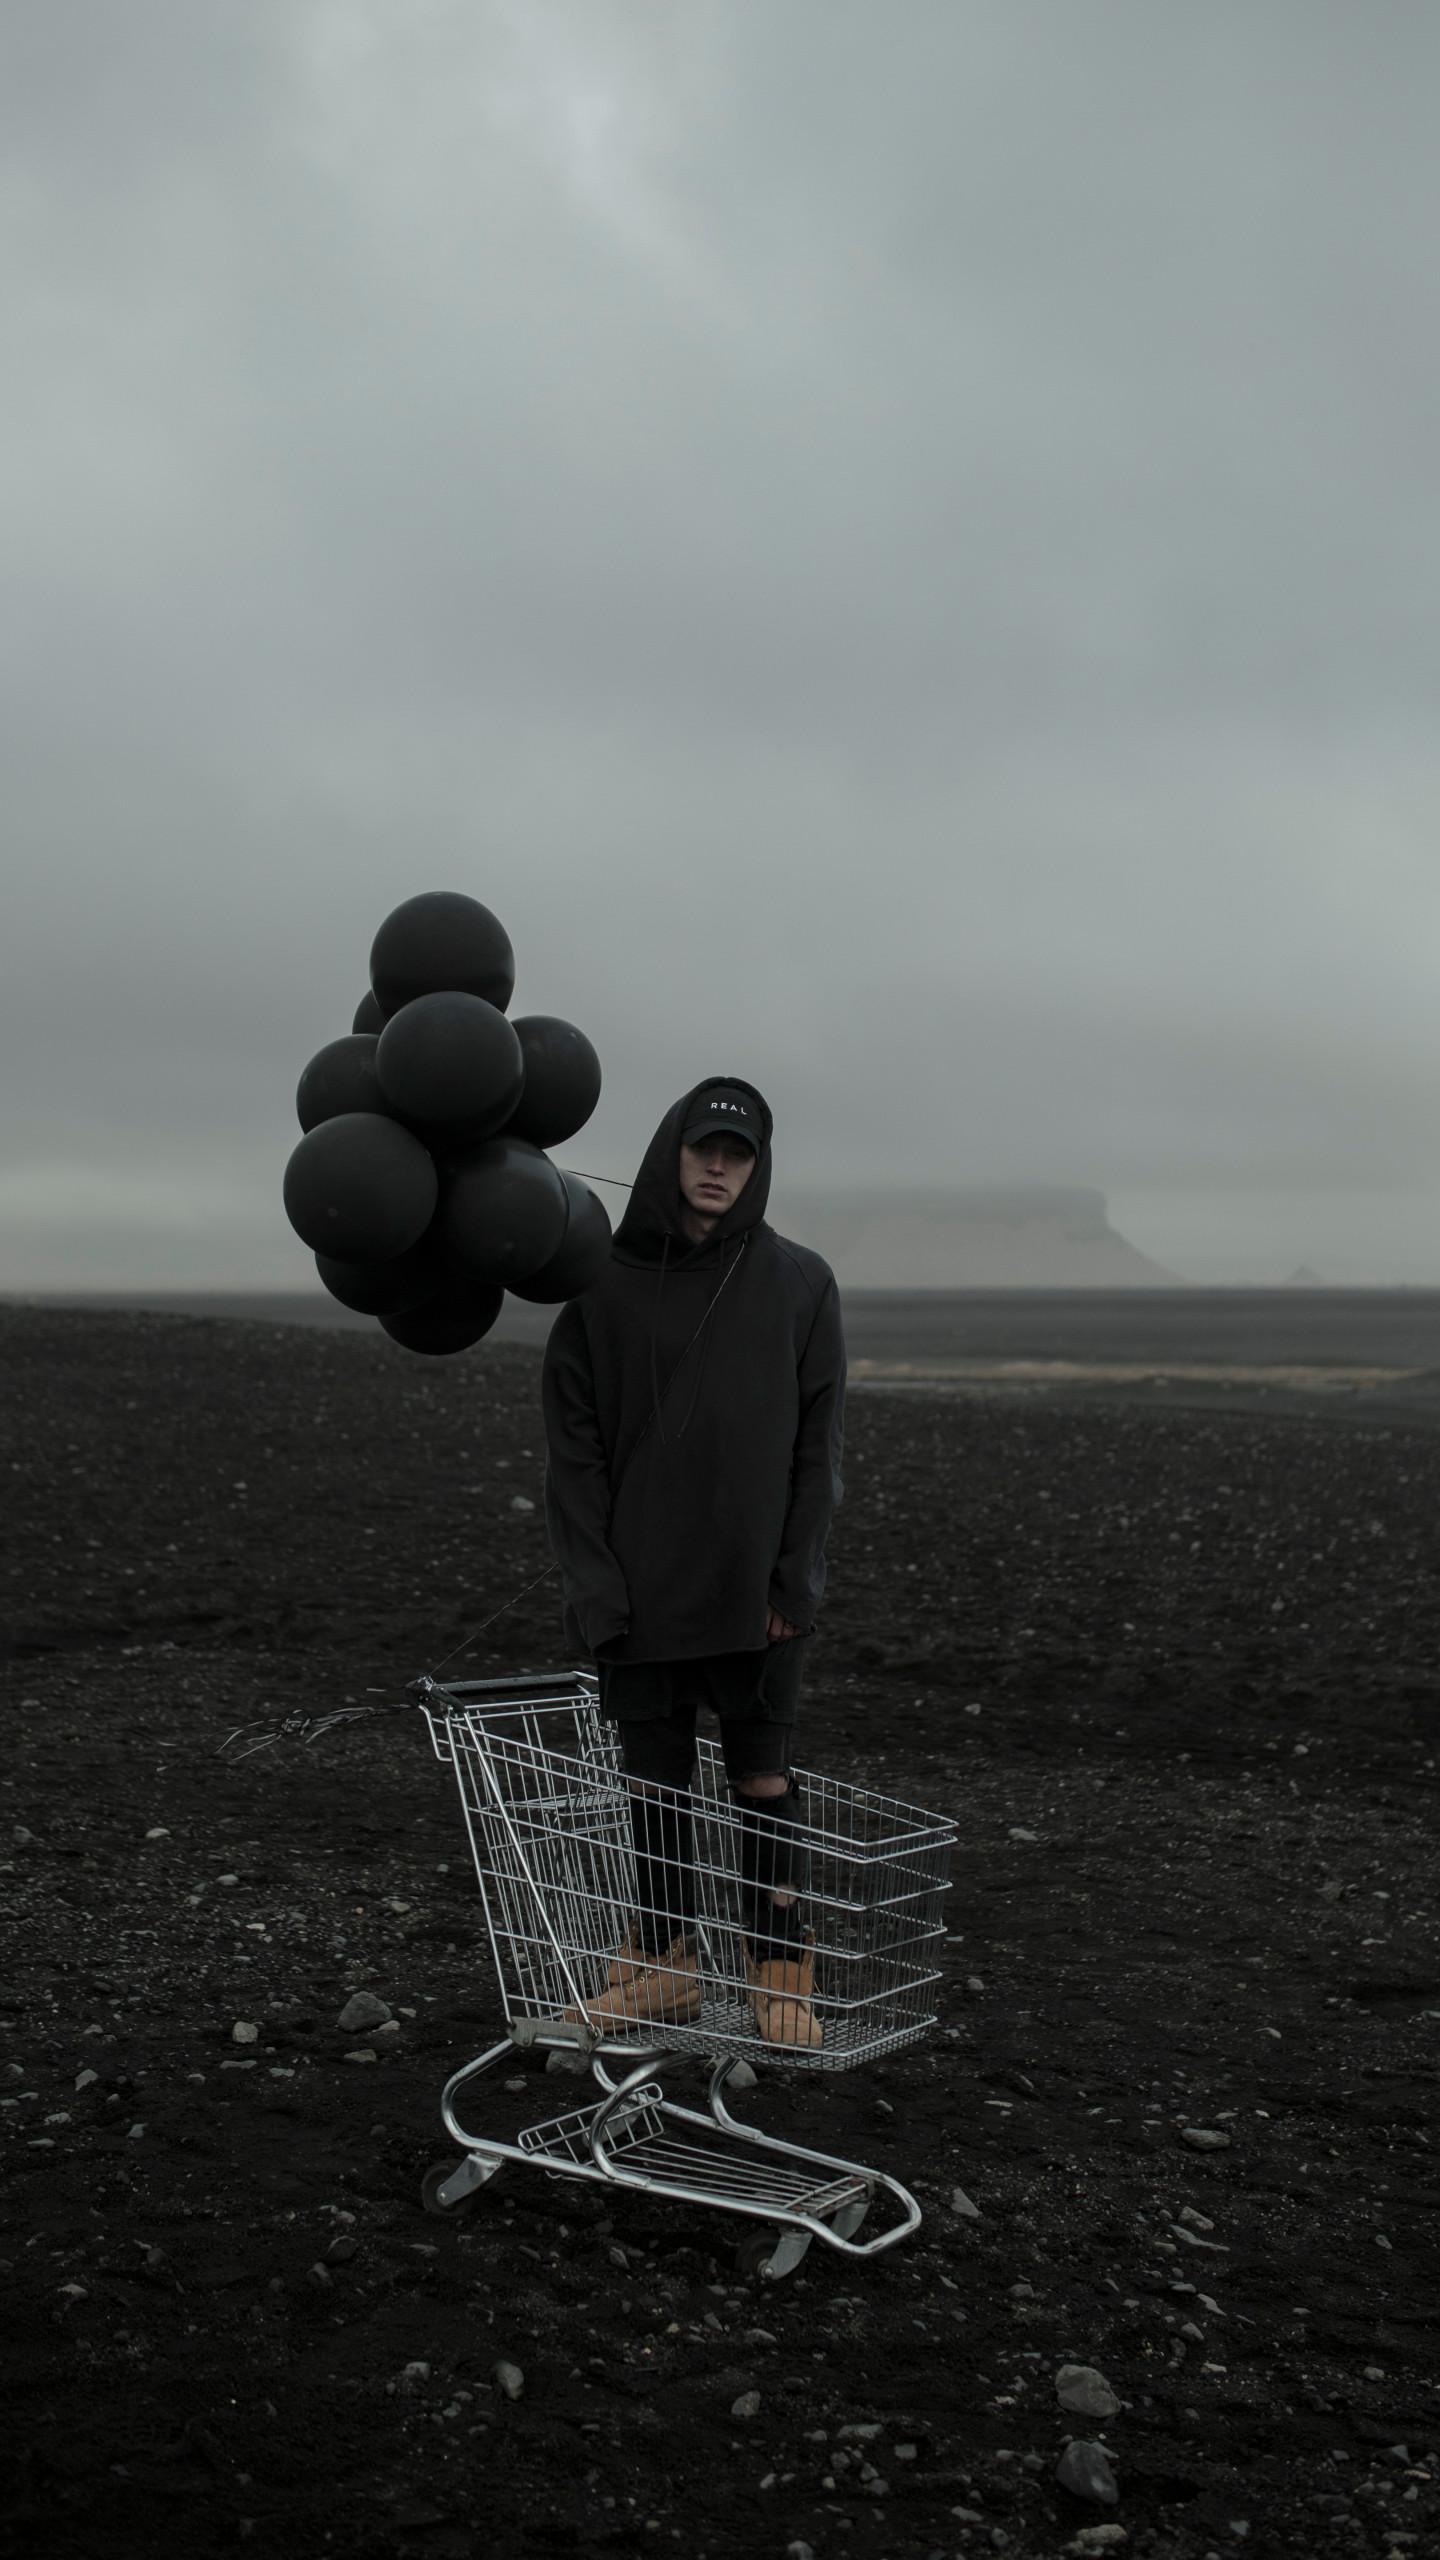 NF brings 'The Search Tour' to Verizon Arena